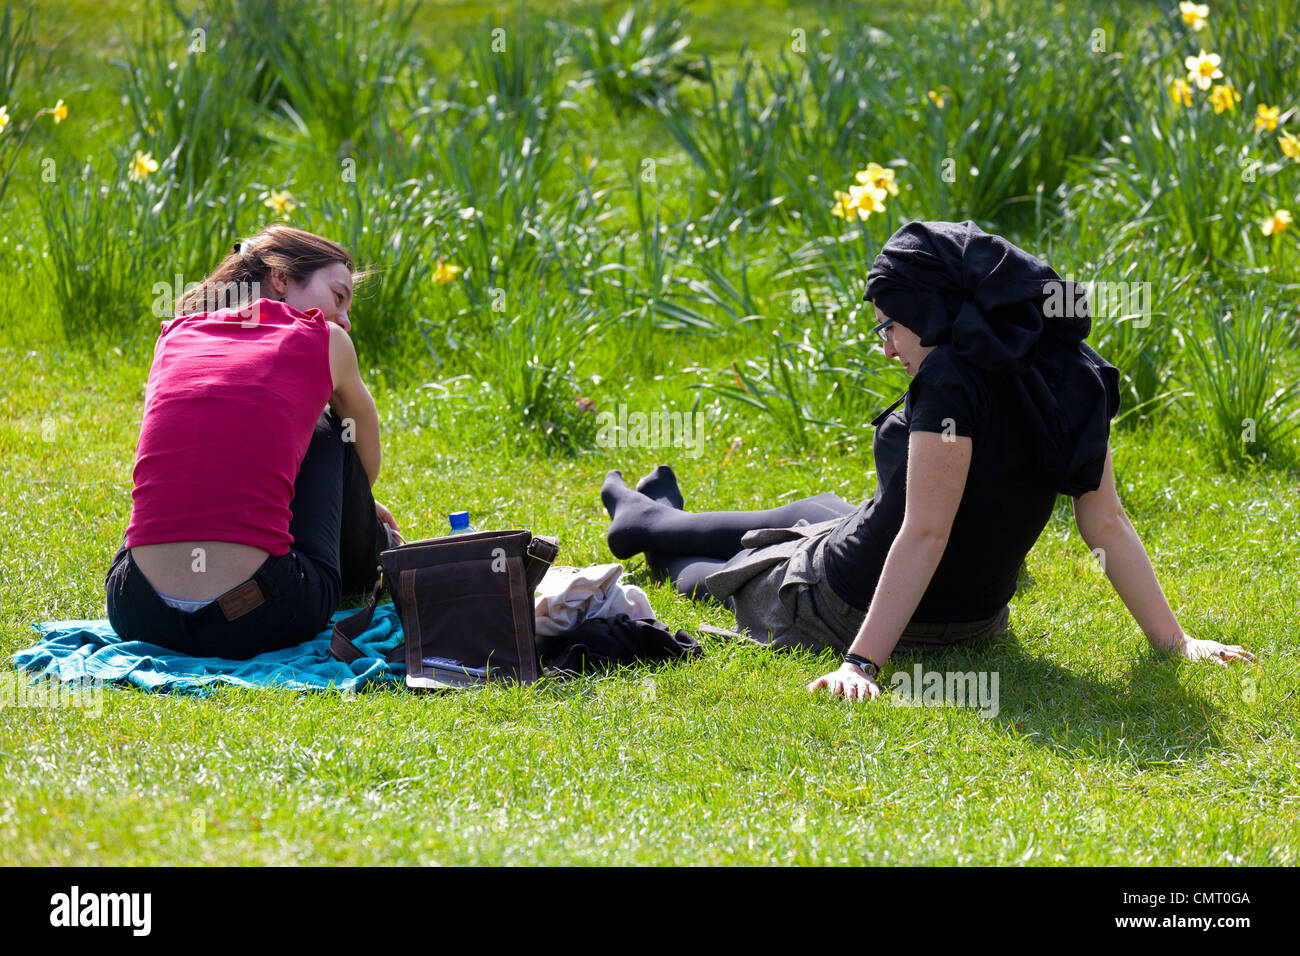 Two women lazing on the grass amidst spring daffodils - Christ Church College Meadows during the Times Literary Festival 2012 Stock Photo